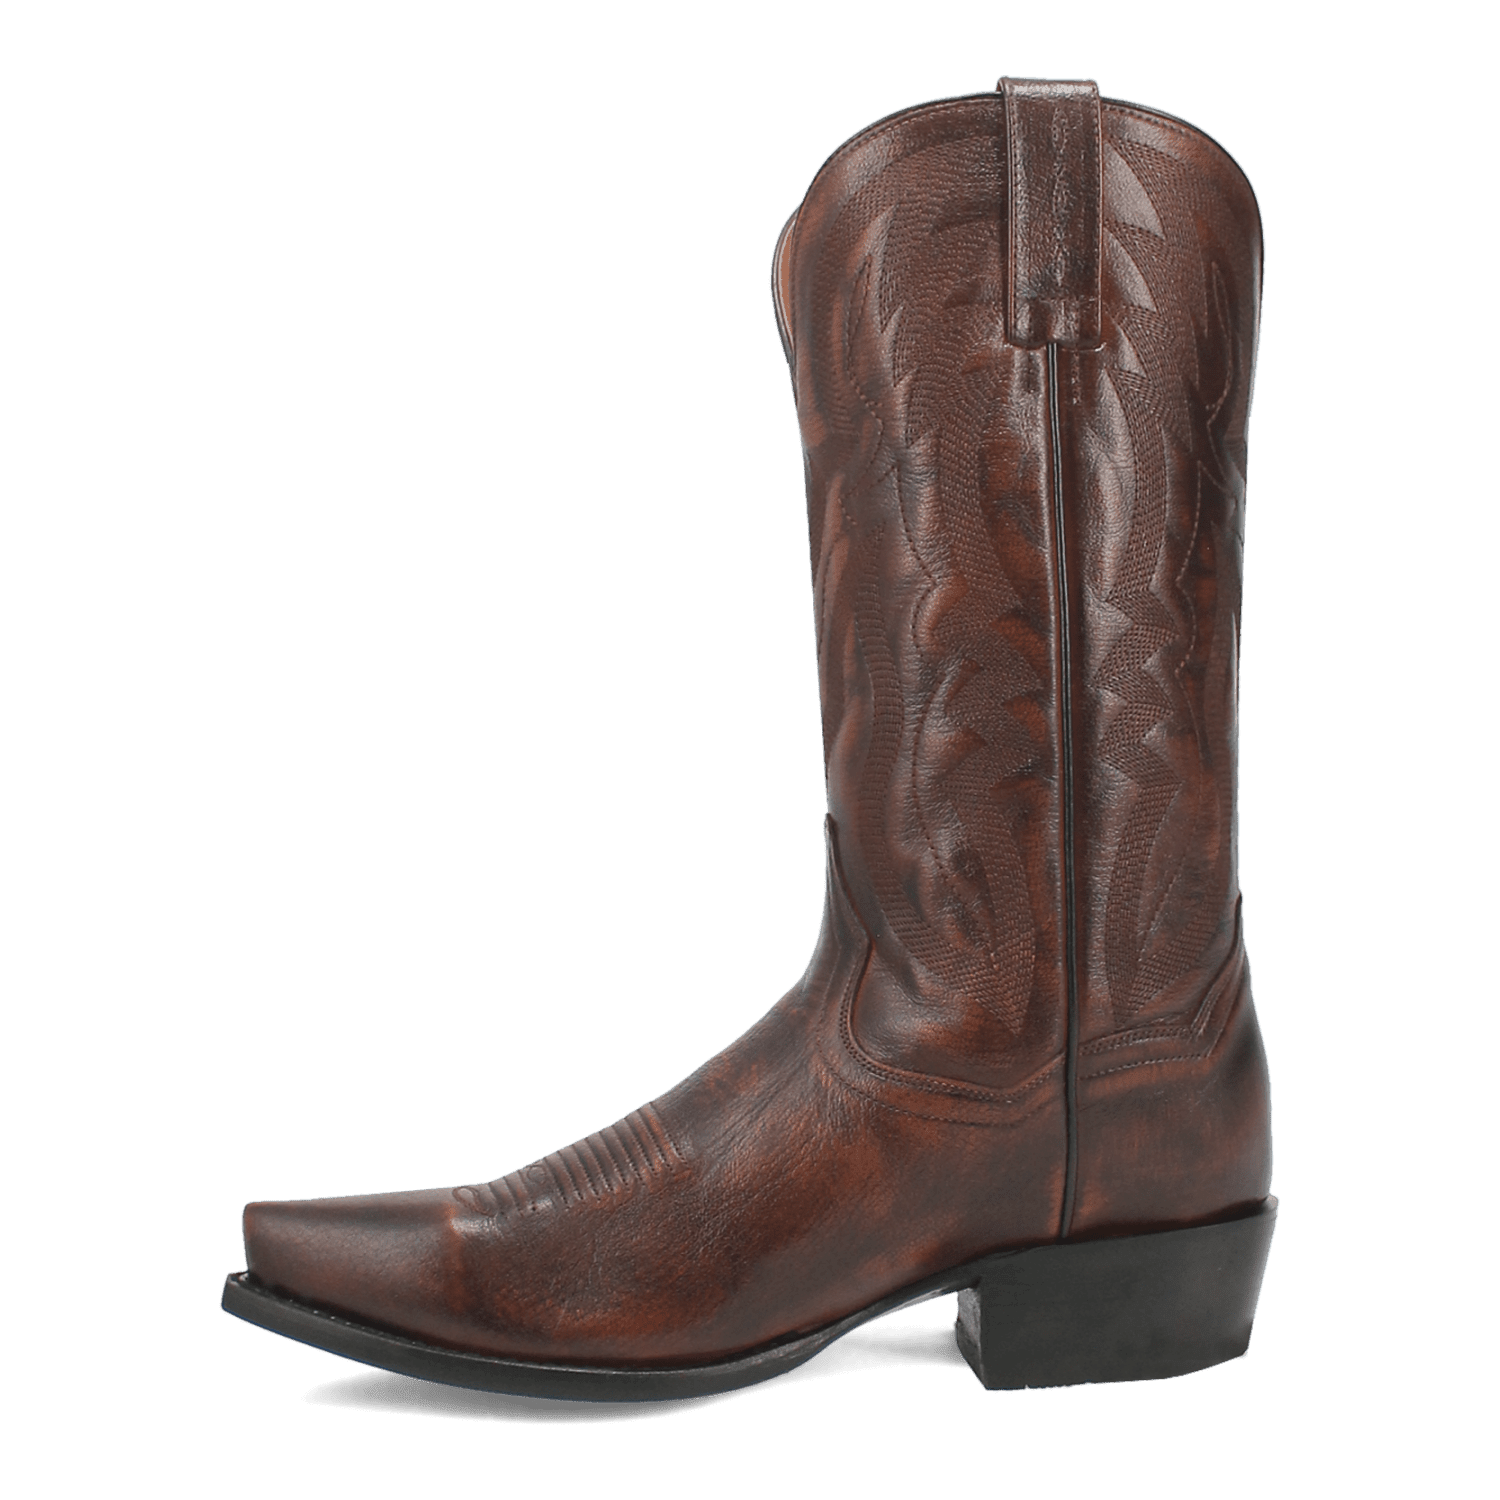 ROD LEATHER BOOT Image